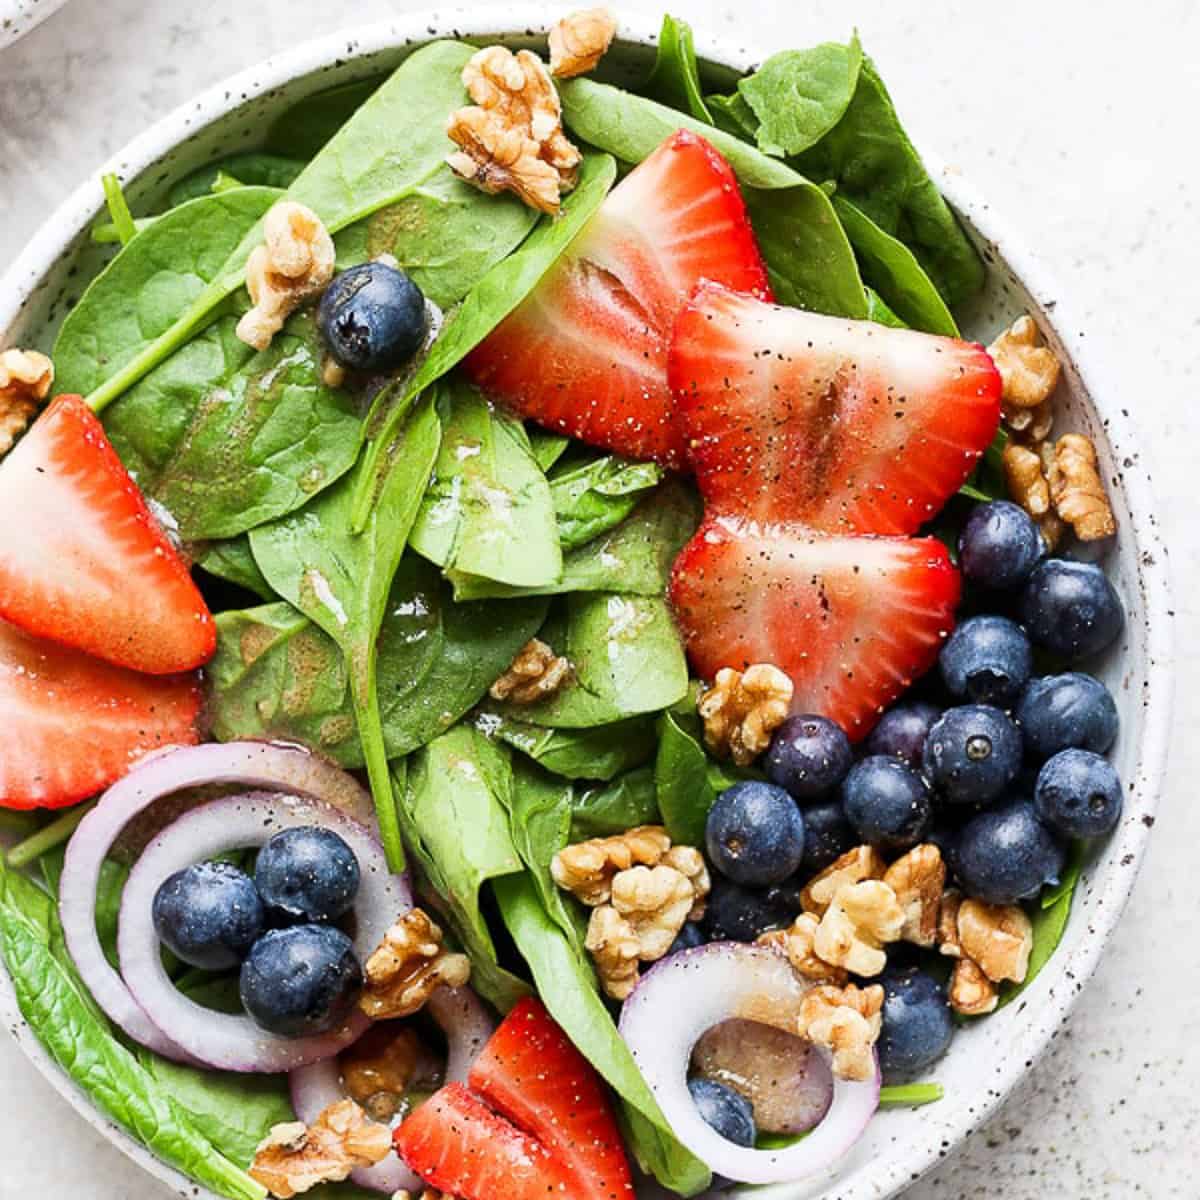 Recipe for a strawberry spinach salad.